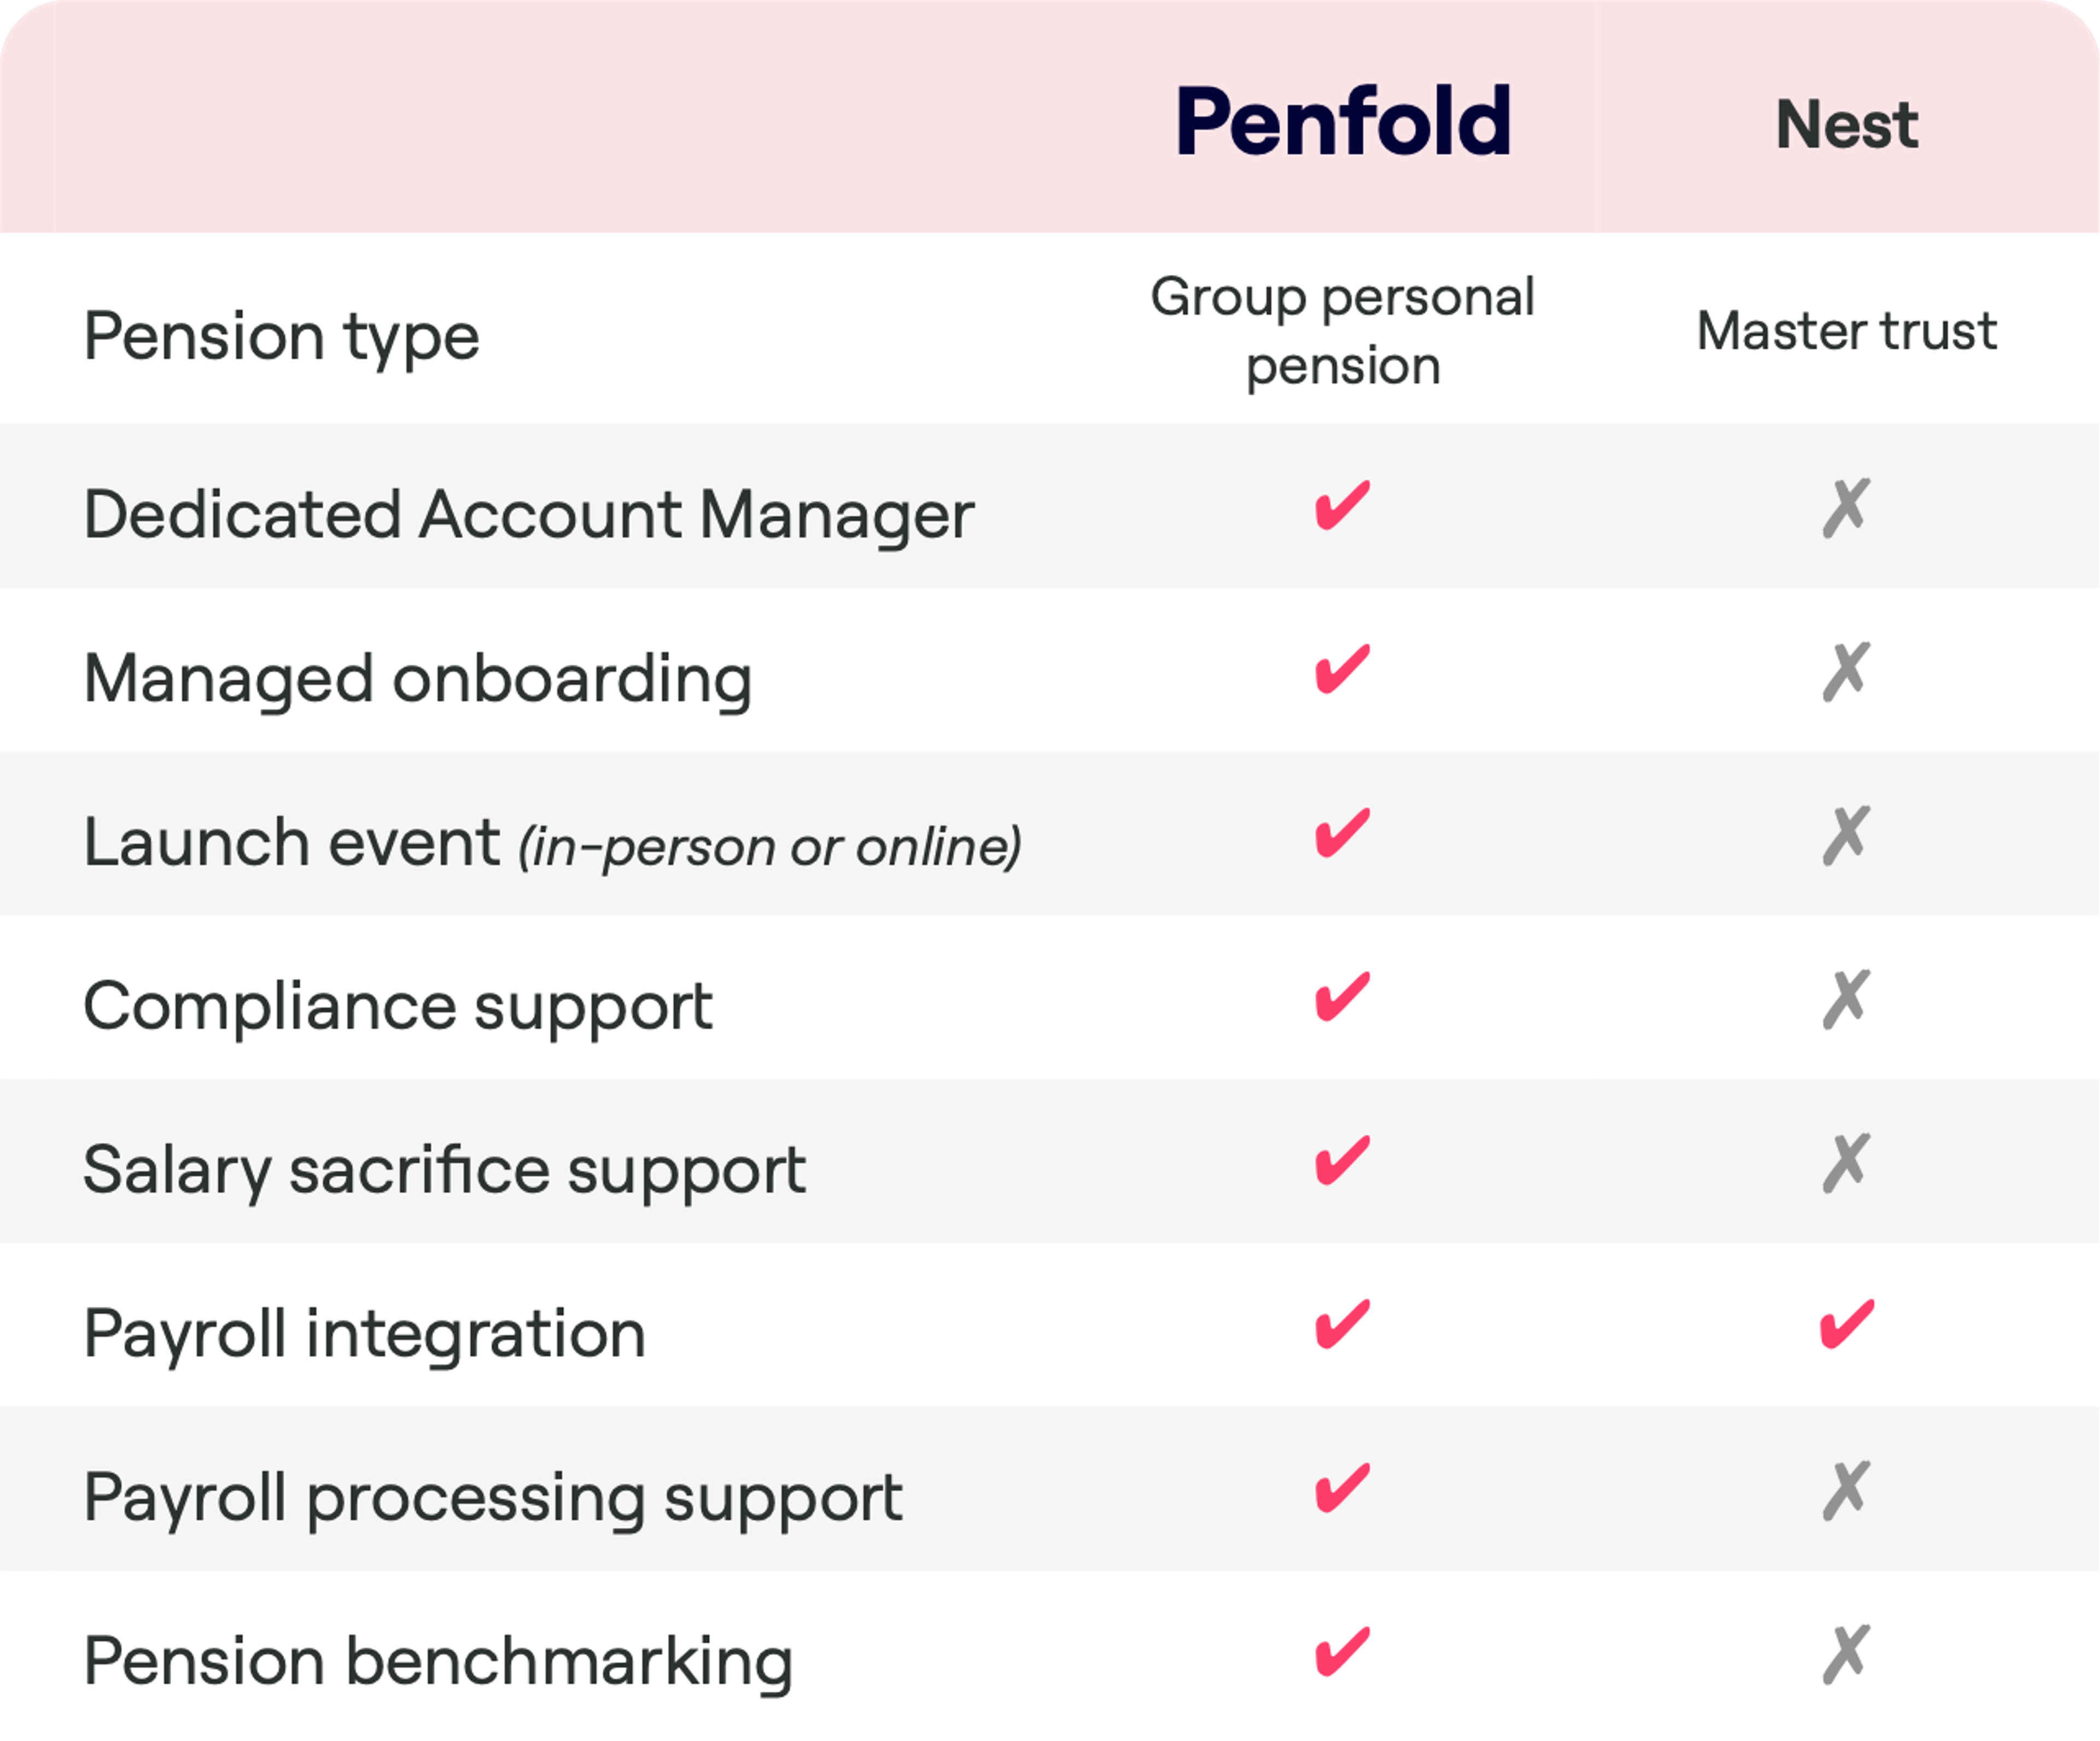 A comparison table between Penfold and Nest pension services. Penfold is labeled as offering a Group personal pension, while Nest is categorized as a Master trust. The table compares services like Dedicated Account Manager, Managed onboarding, Launch event, Compliance support, Salary sacrifice support, Payroll integration, Payroll processing support, and Pension benchmarking. Penfold offers all eight services listed, whereas Nest only offers Payroll integration.